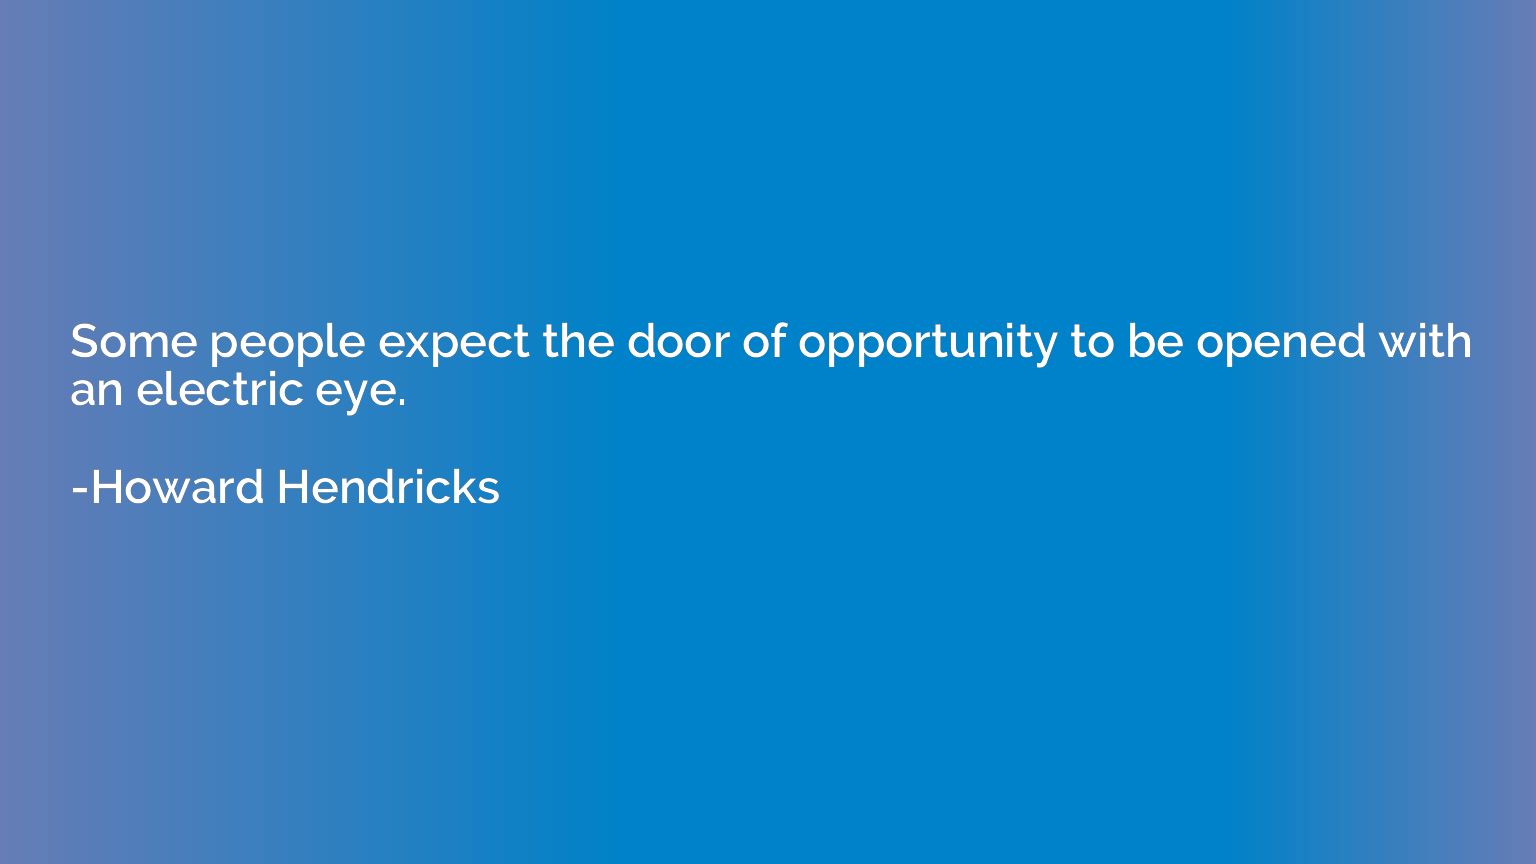 Some people expect the door of opportunity to be opened with